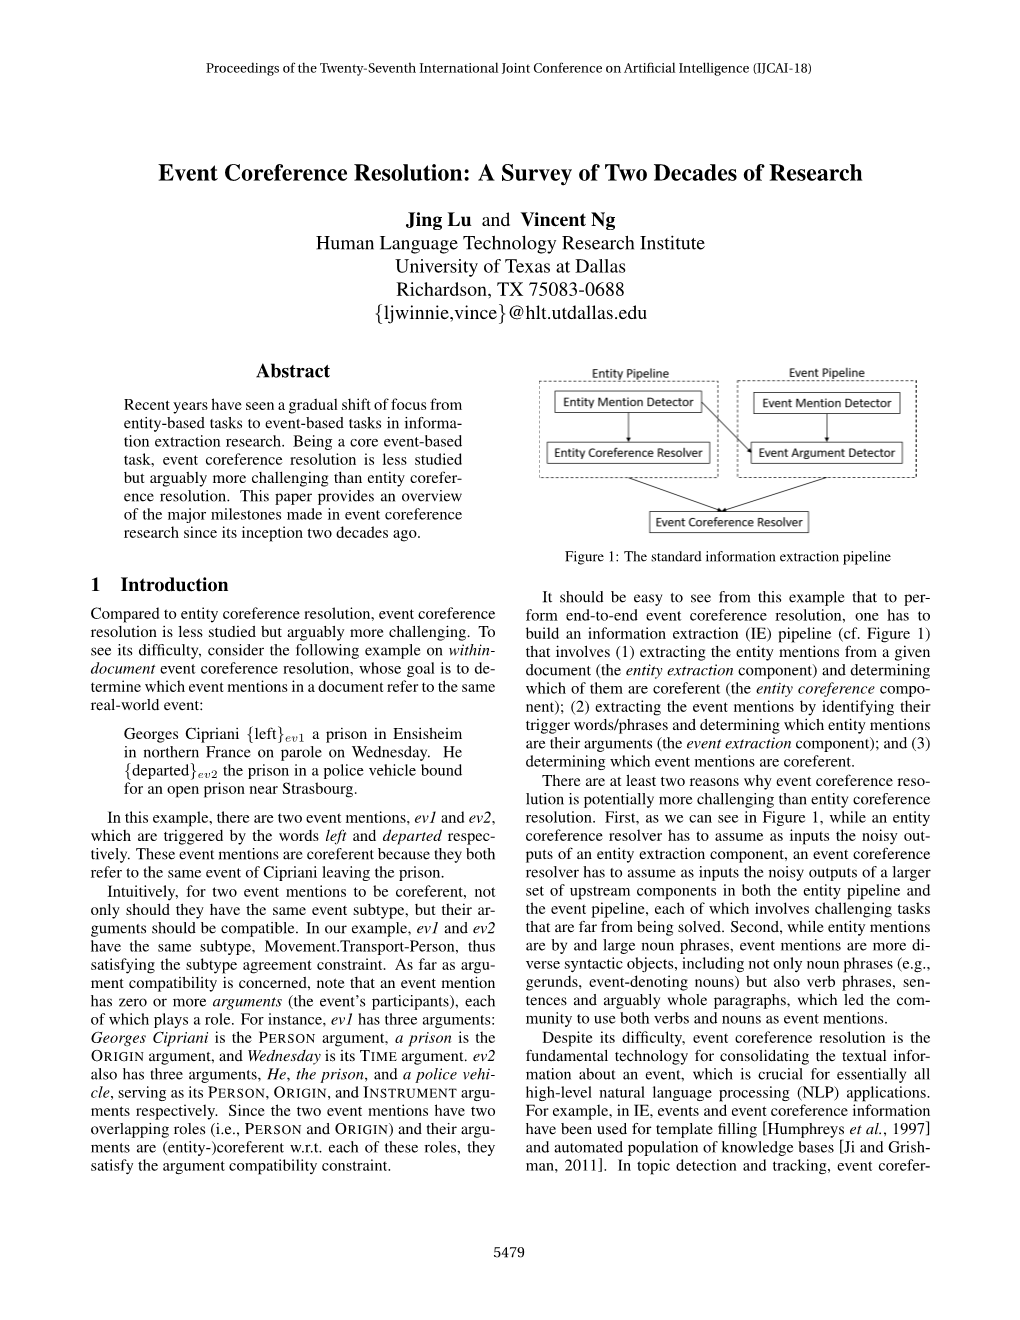 Event Coreference Resolution: a Survey of Two Decades of Research